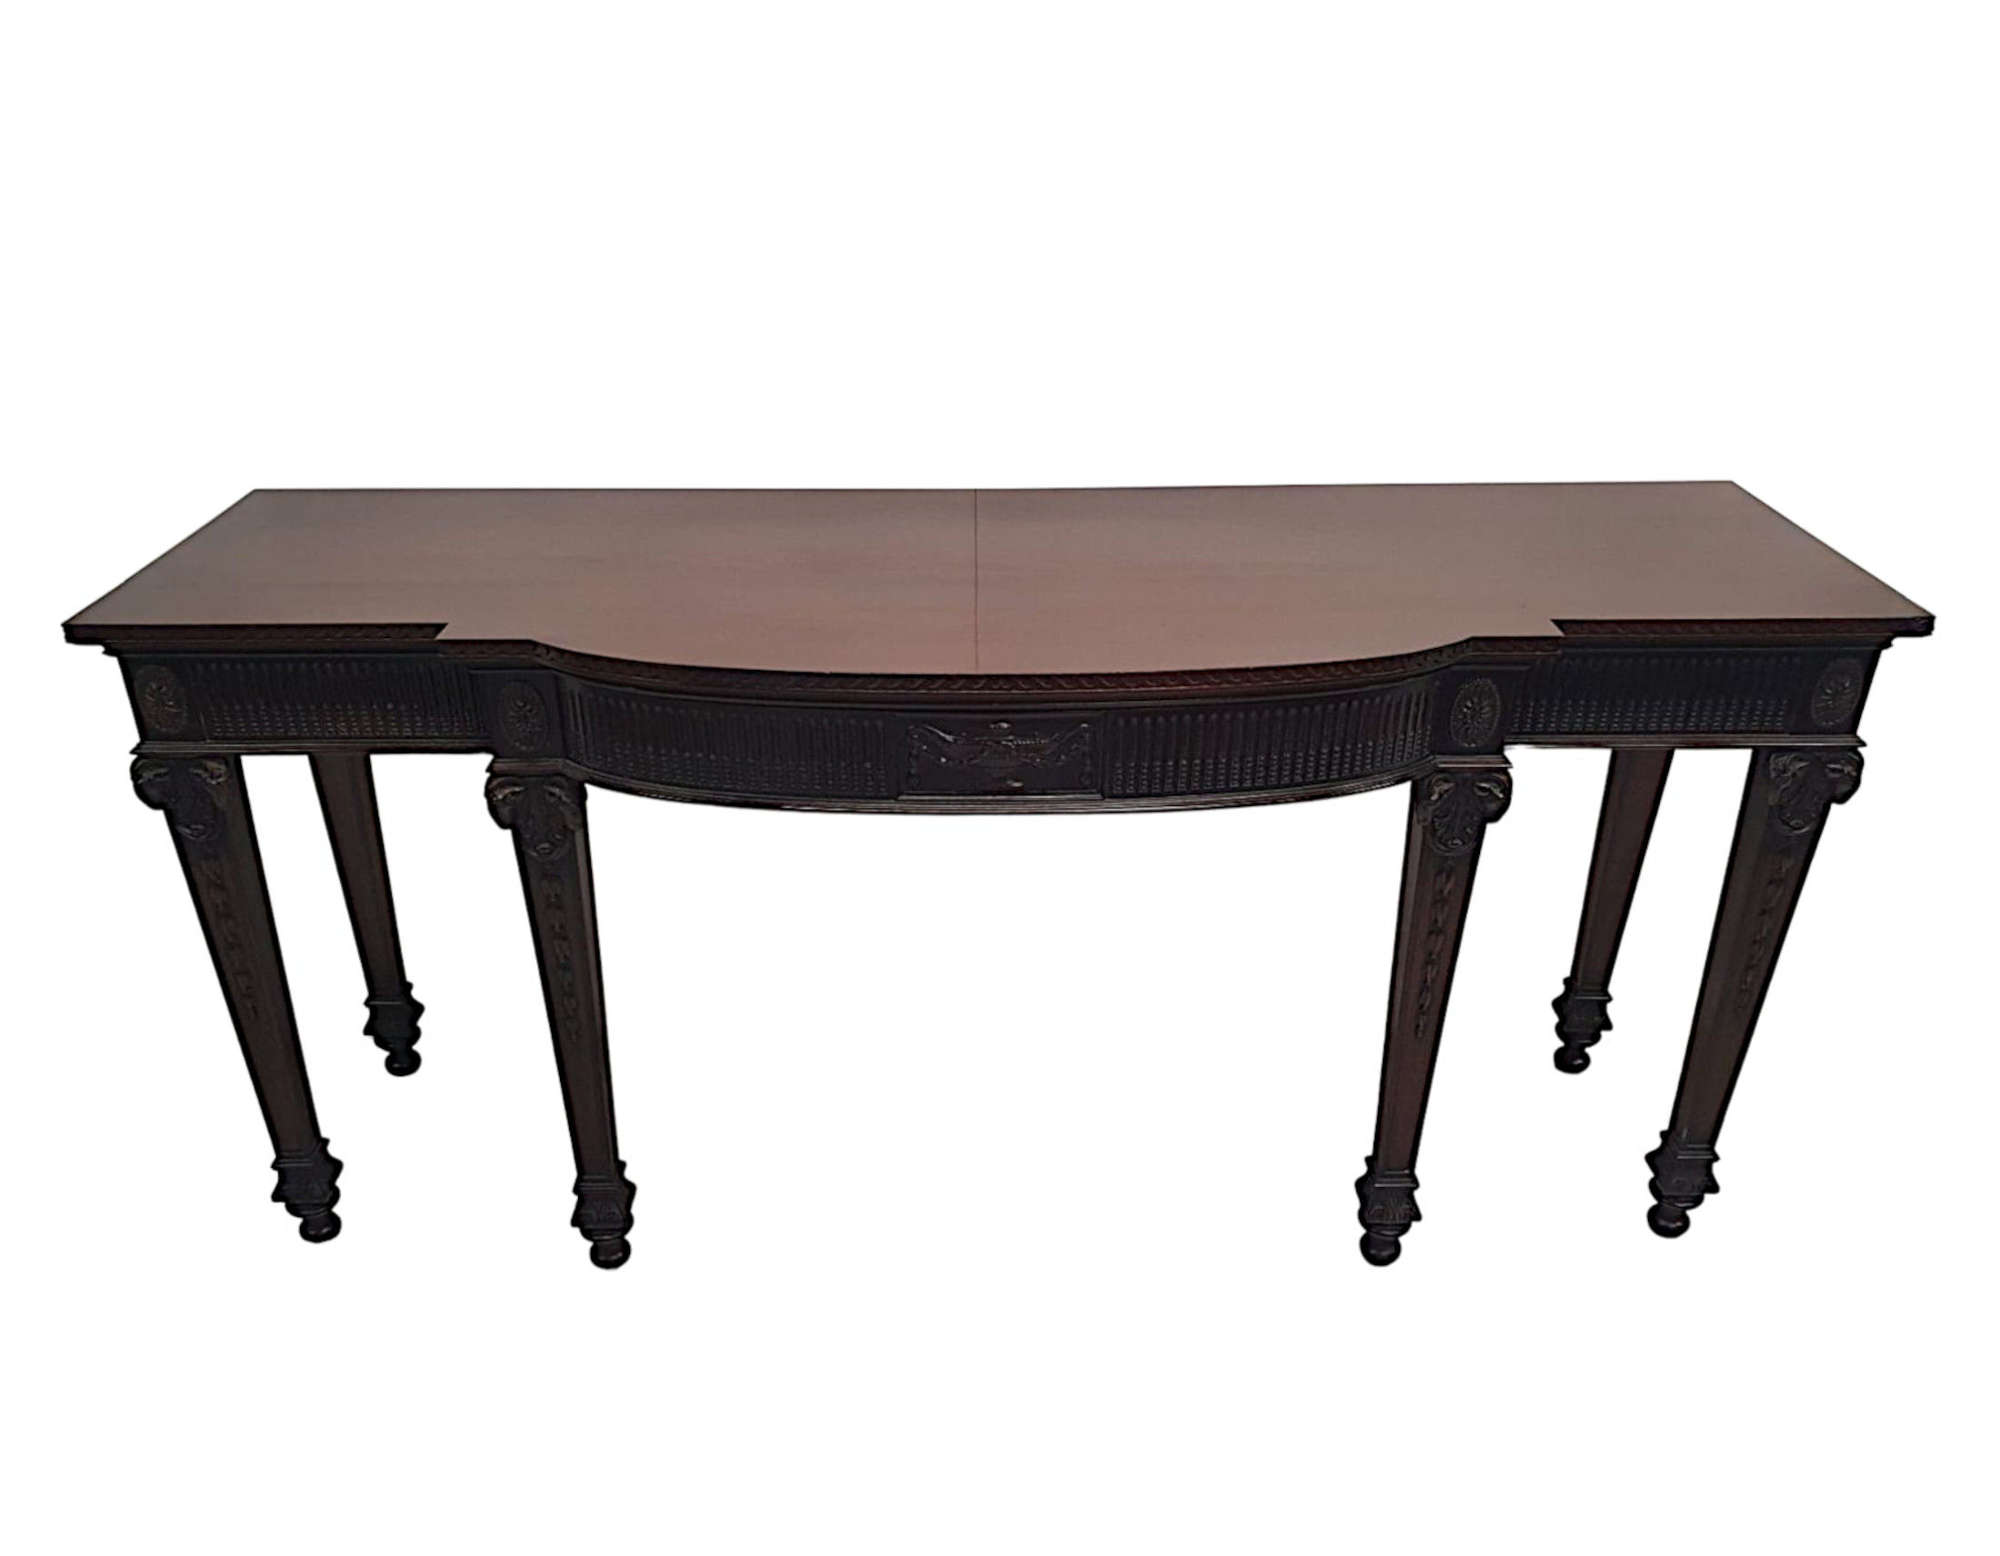 A Rare Edwardian Console Or Antique Hall Table In The Manner Of Adams By Maples Of London